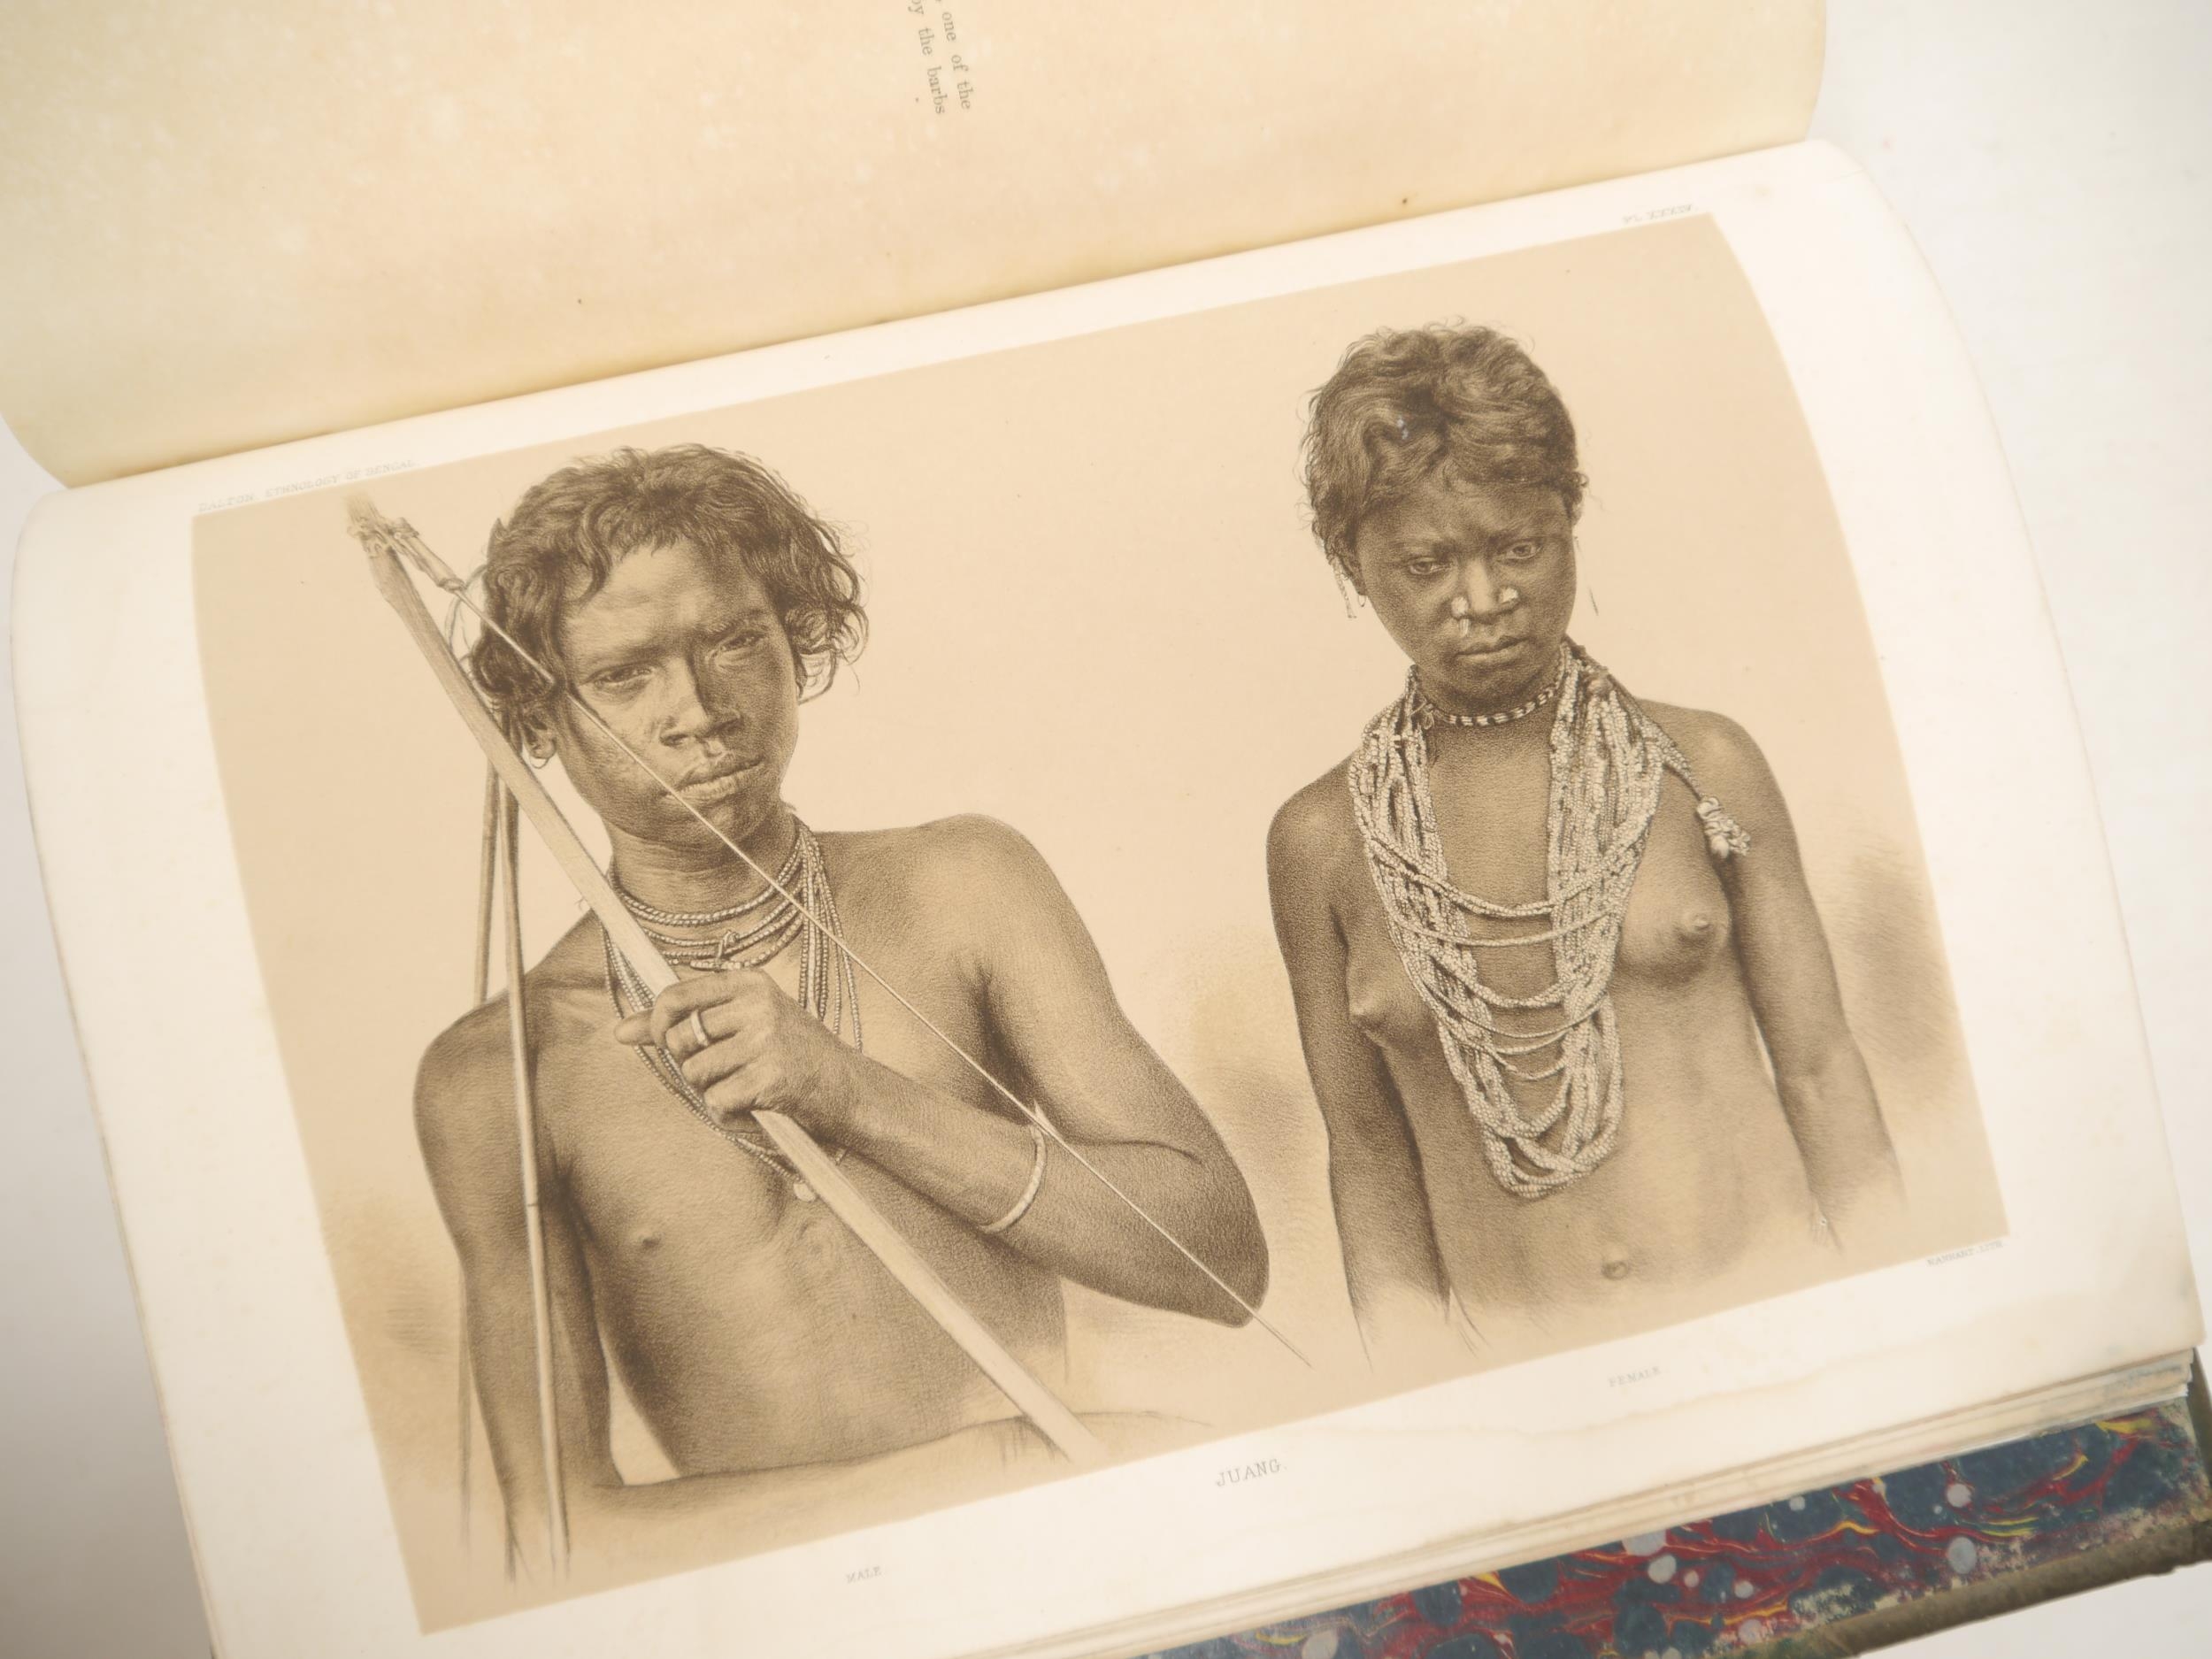 Edward Tuite Dalton: 'Descriptive Ethnology of Bengal', Calcutta, Office of the Superintendent of - Image 22 of 27